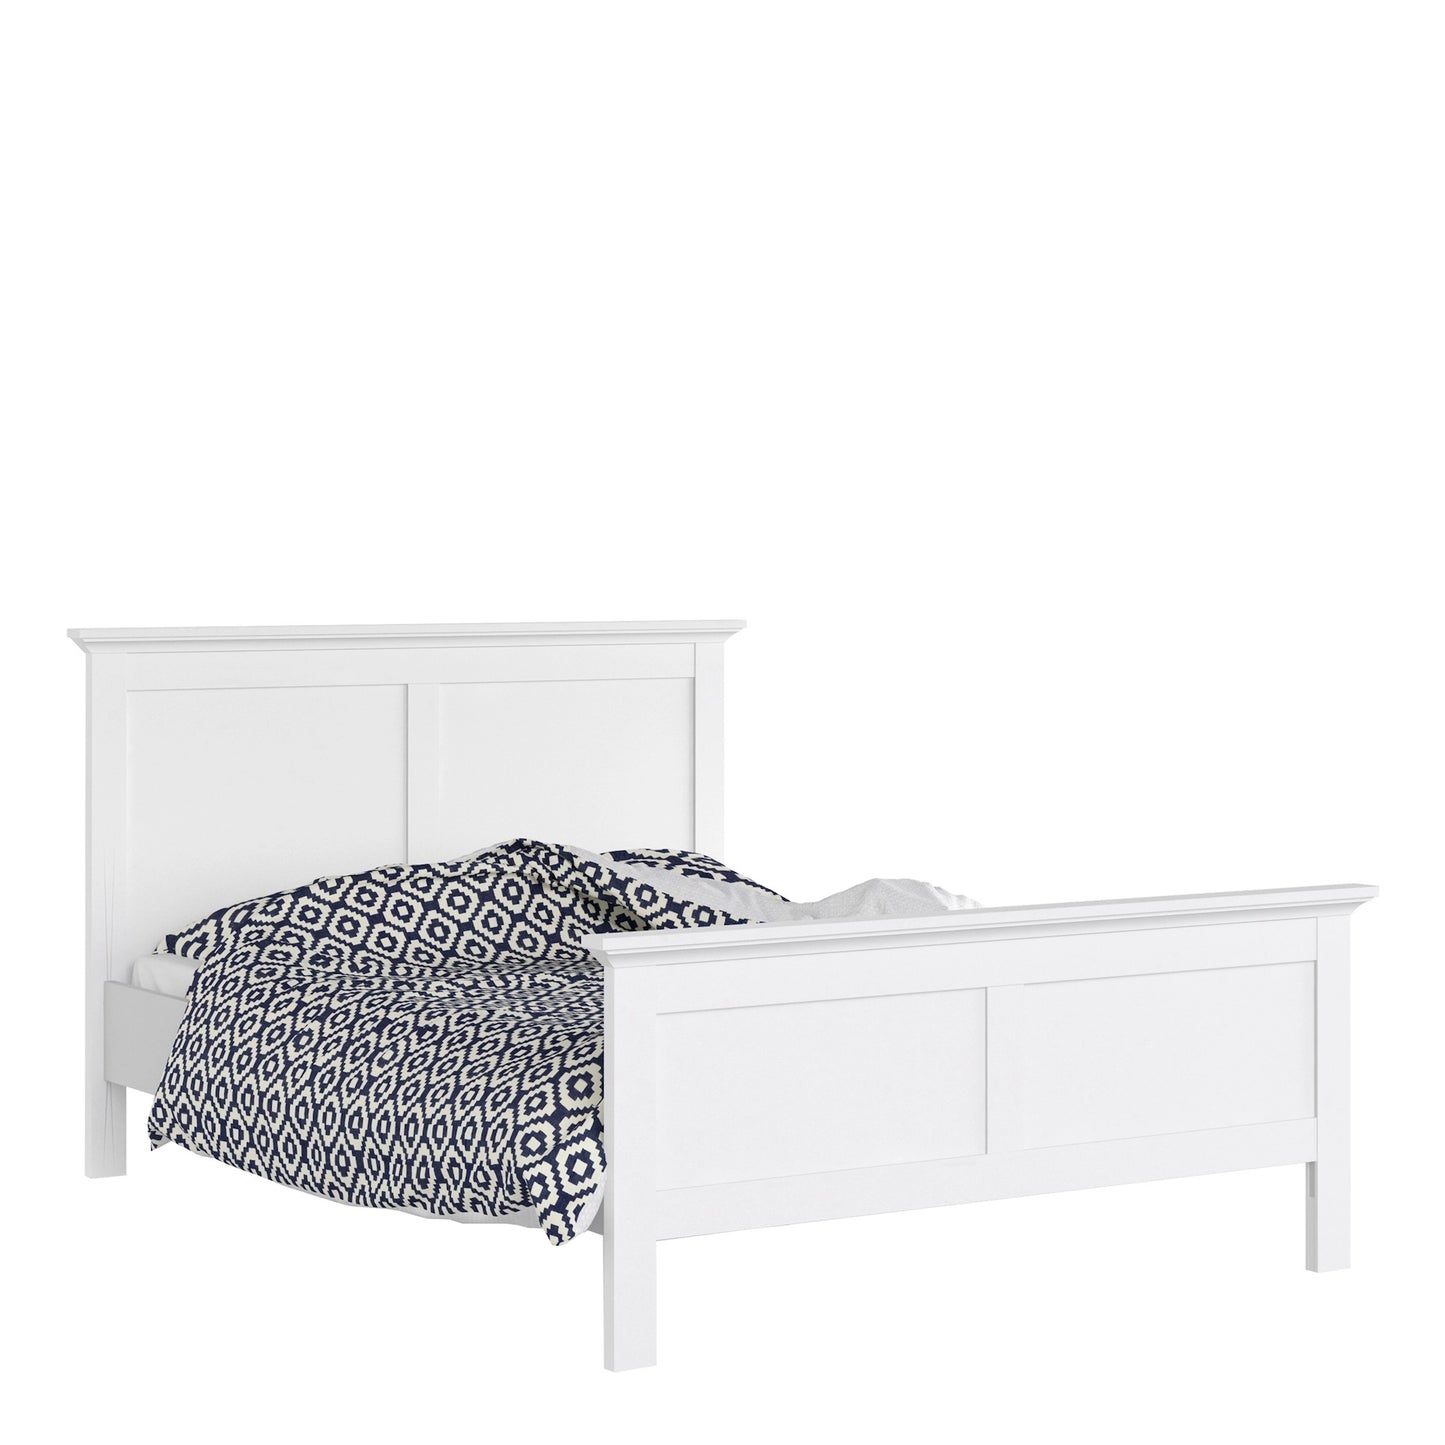 Furniture To Go Paris 4ft 6in Double Bed in White